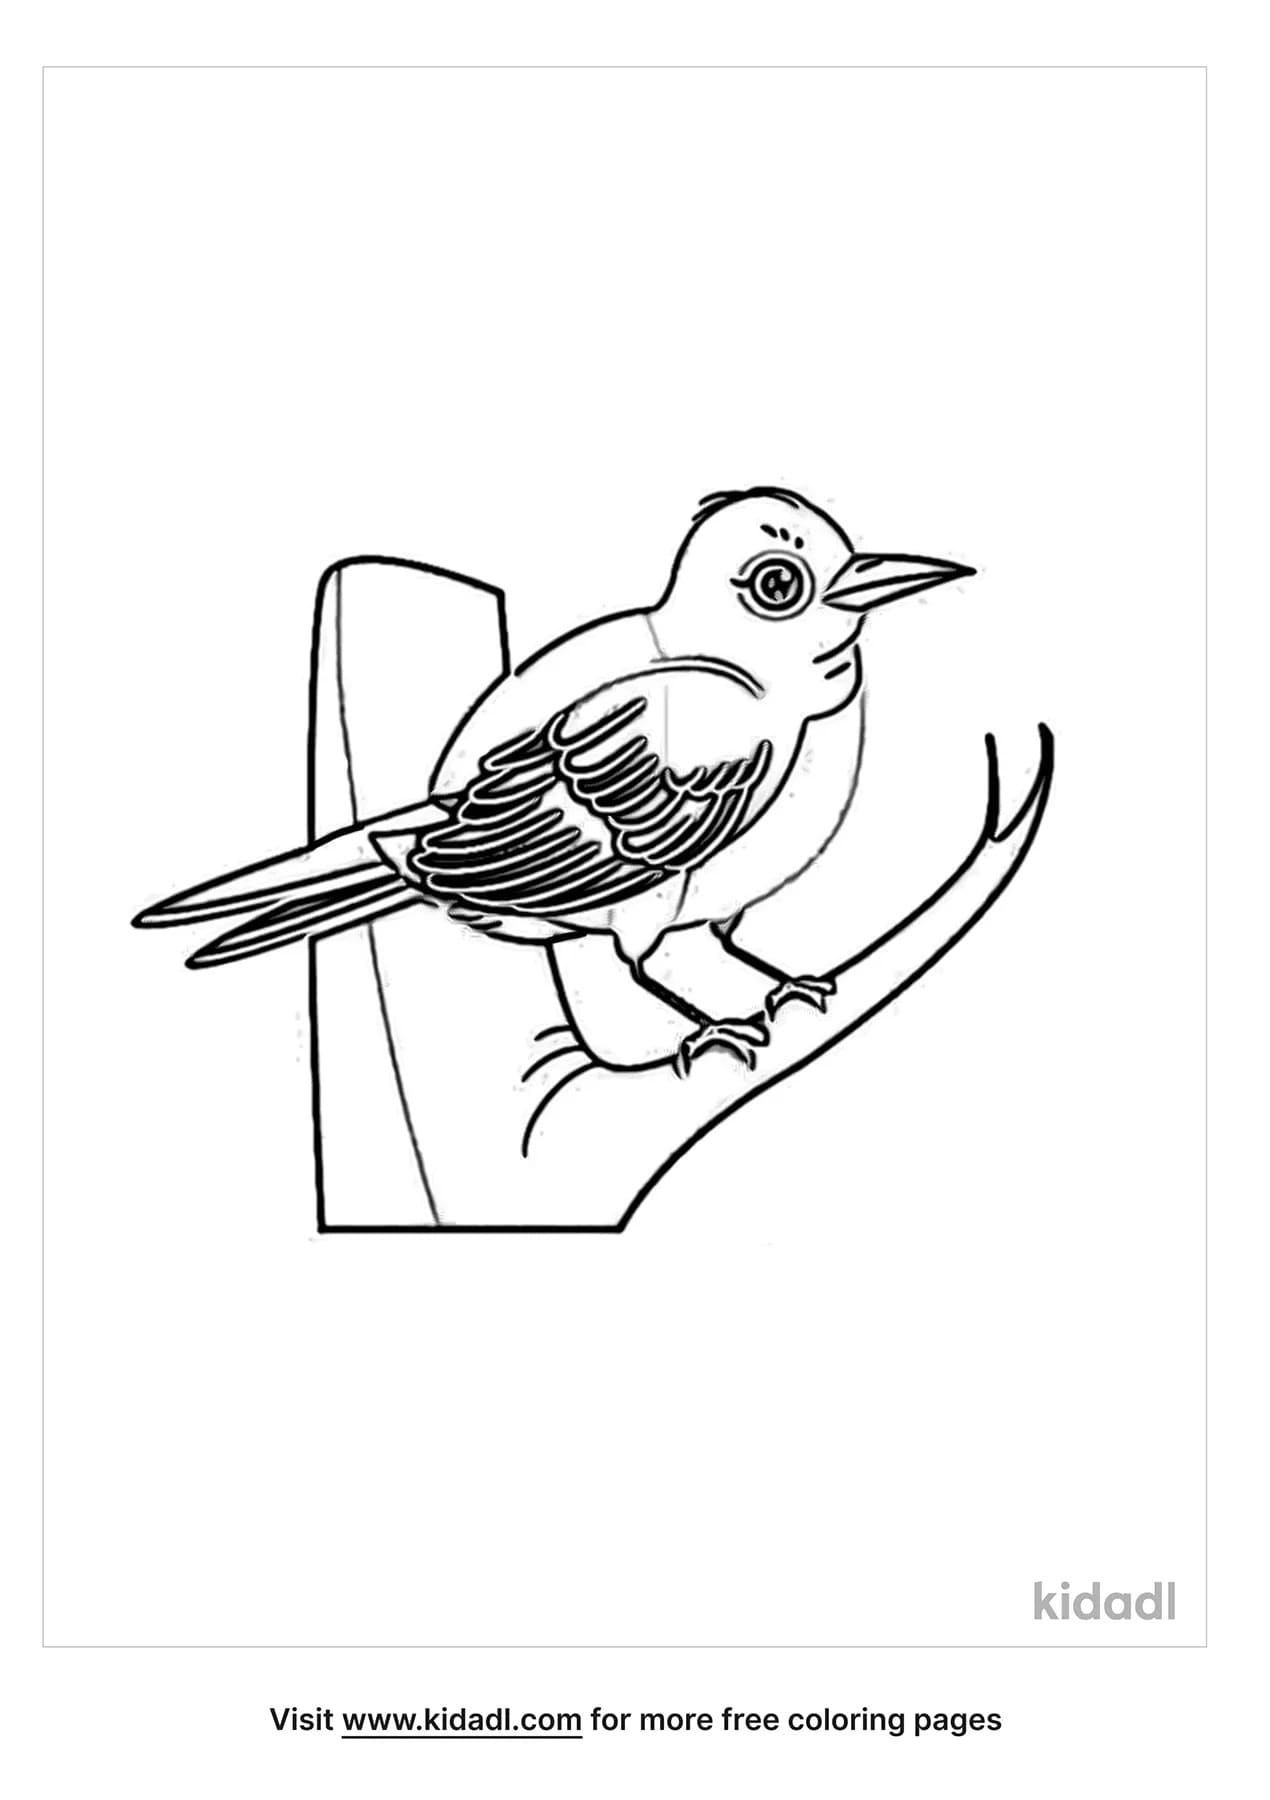 Gallery Mockingbird For Kids Coloring Page